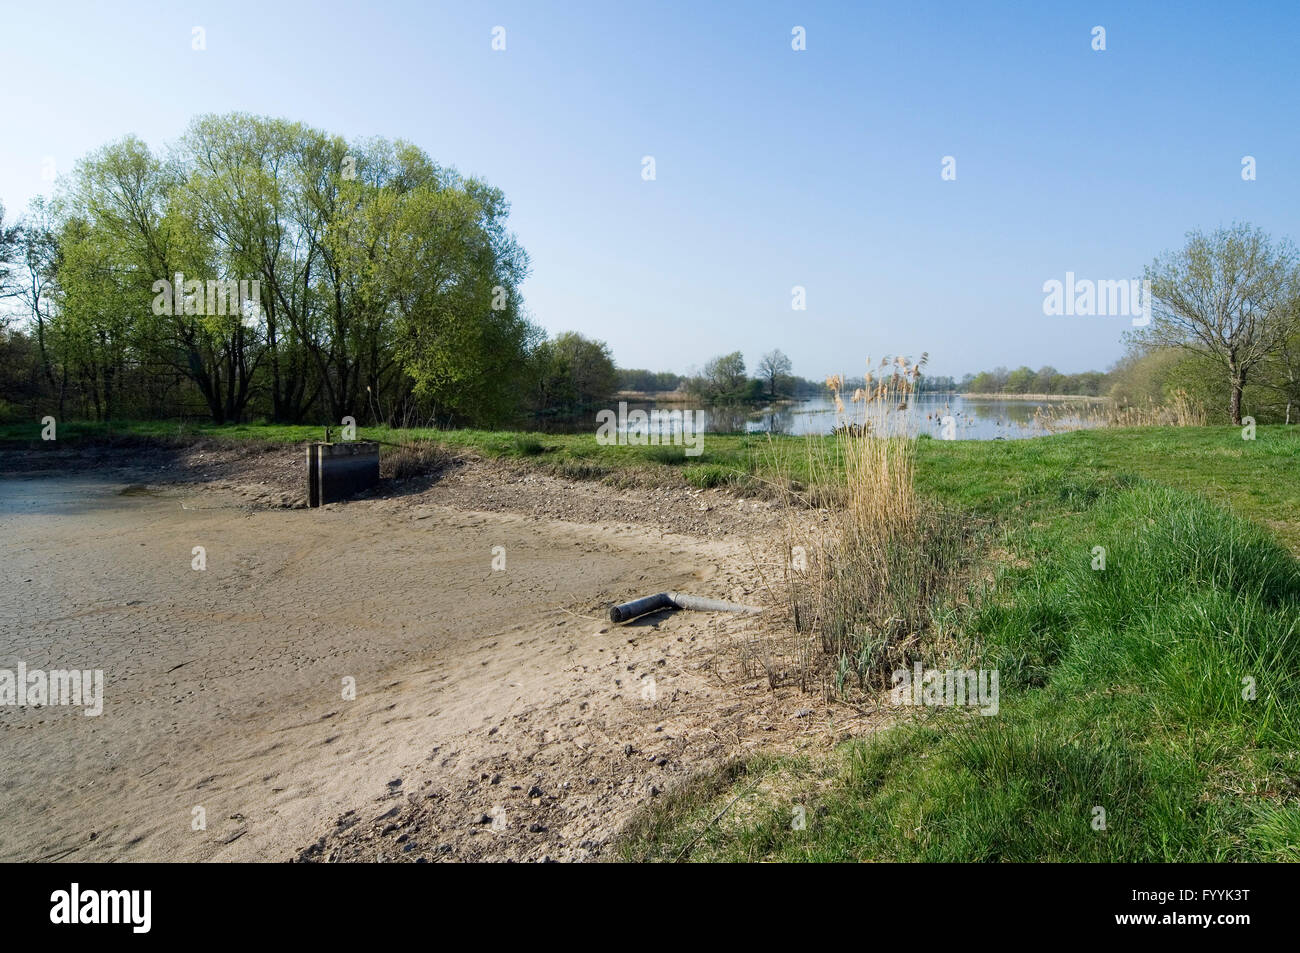 Drained lake / empty étang used for fish-farming in the Parc naturel régional de la Brenne, Indre, France Stock Photo